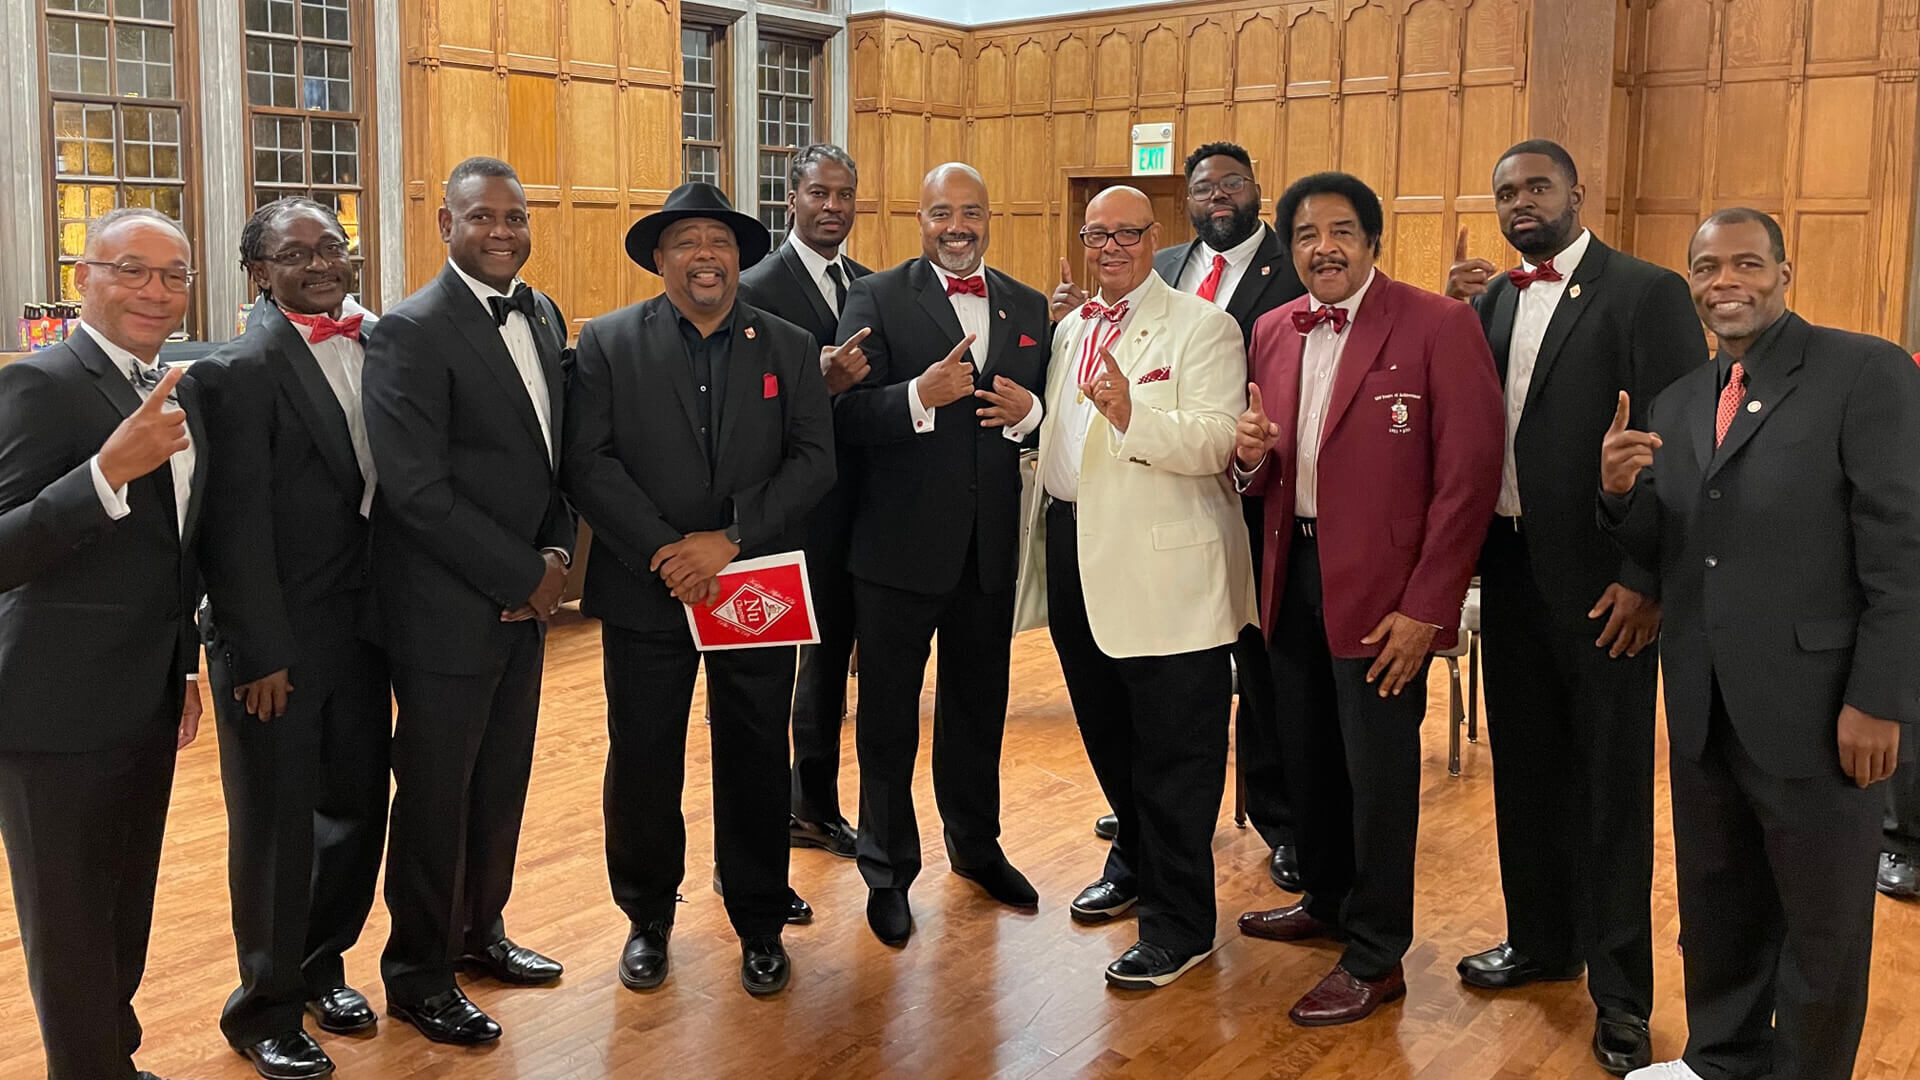 Maurice Markey poses with nine Kappa Alpha Psi brothers at the Purdue Memorial Union, several showing the Kappa Alpha Psi hand sign